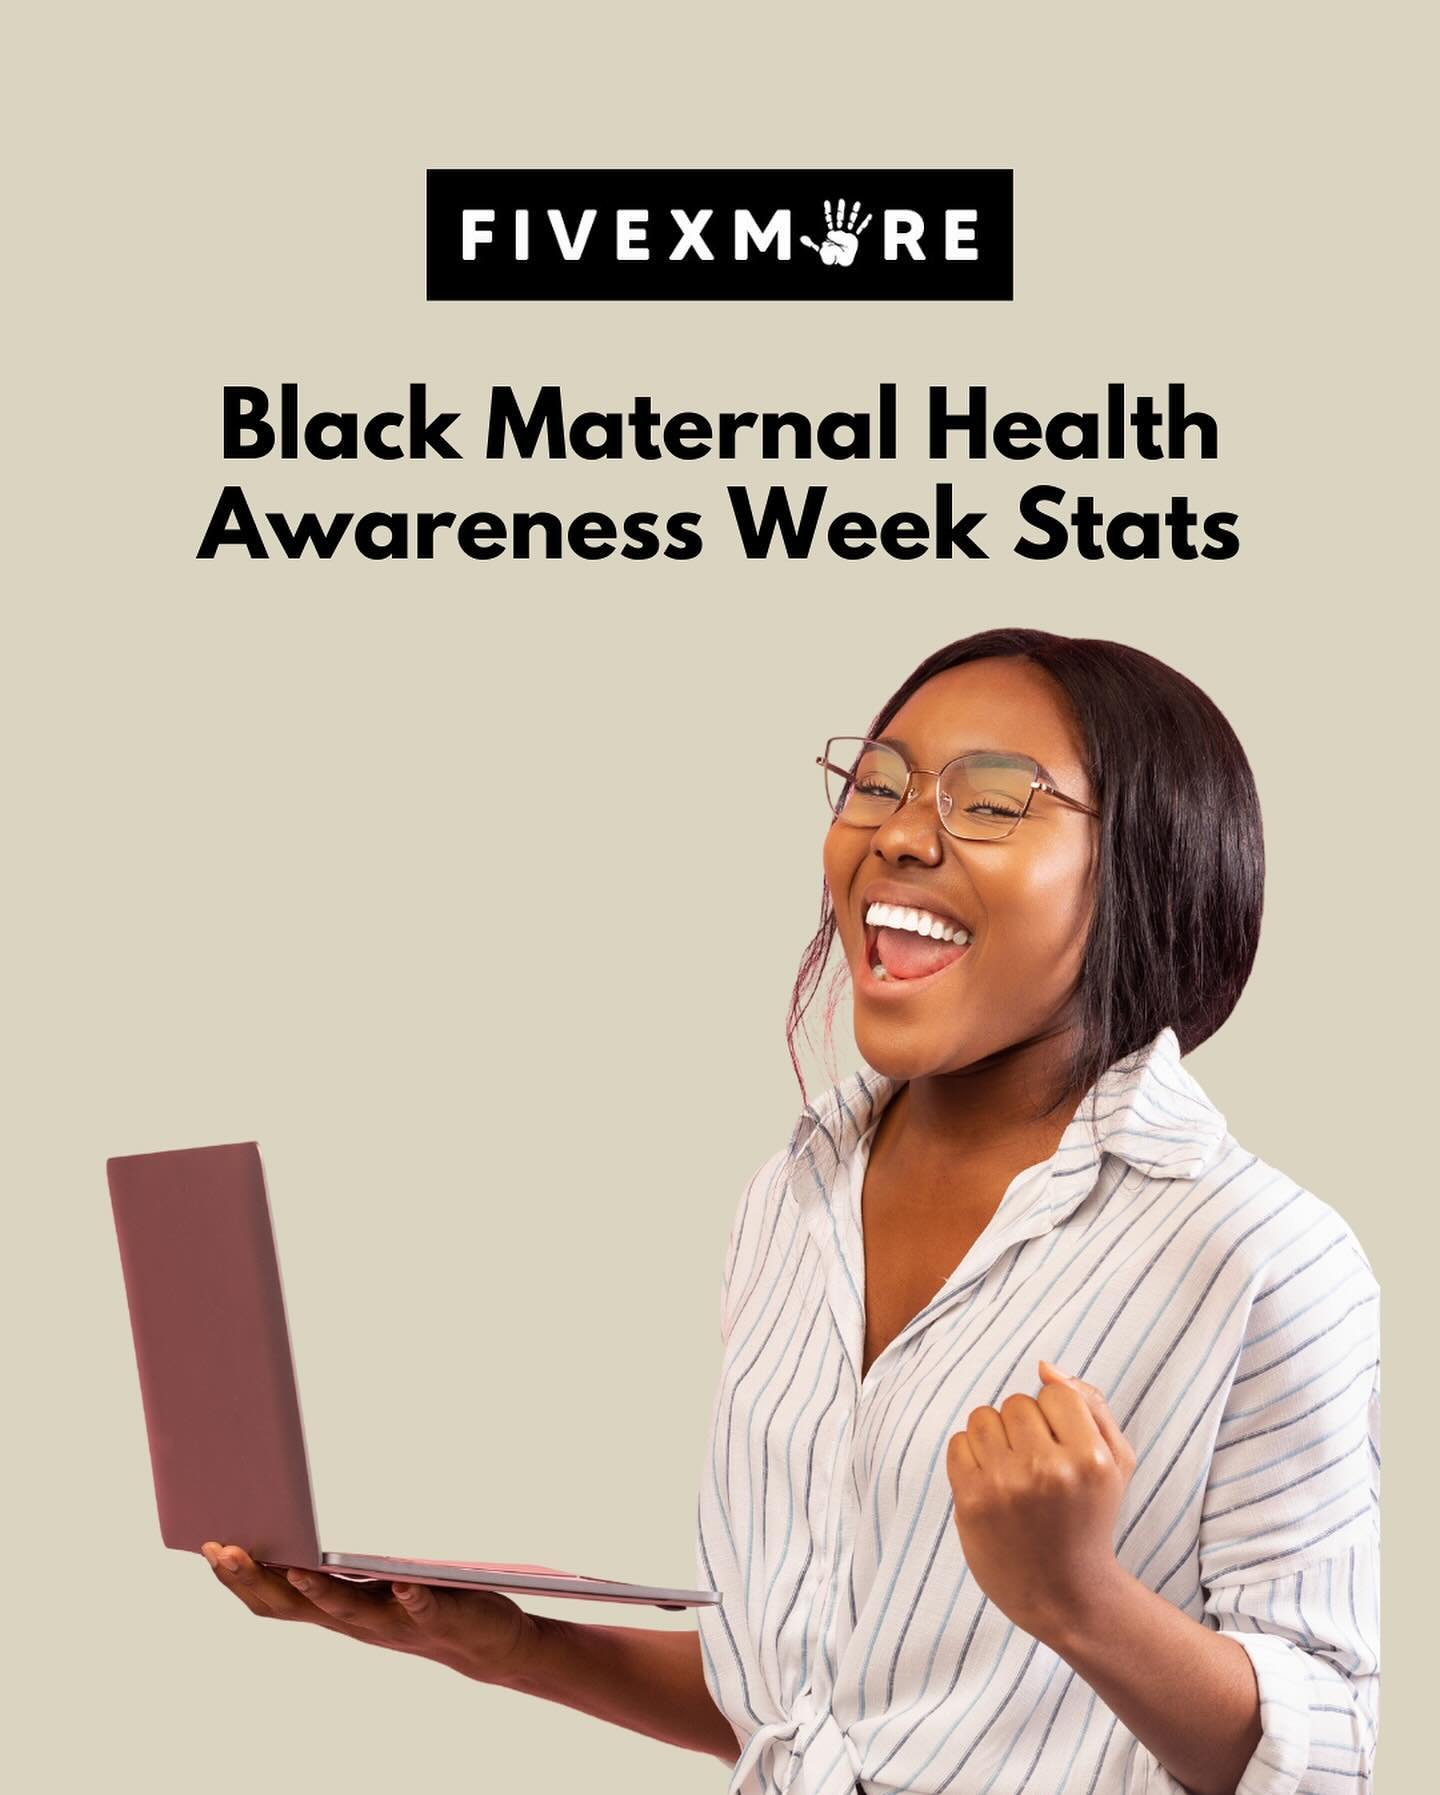 We&rsquo;re diving into the stats from this impactful week and expressing our heartfelt thanks to everyone who contributed.

Your support, from sharing posts to engaging in discussions, is helping us drive meaningful change for Black maternal health.